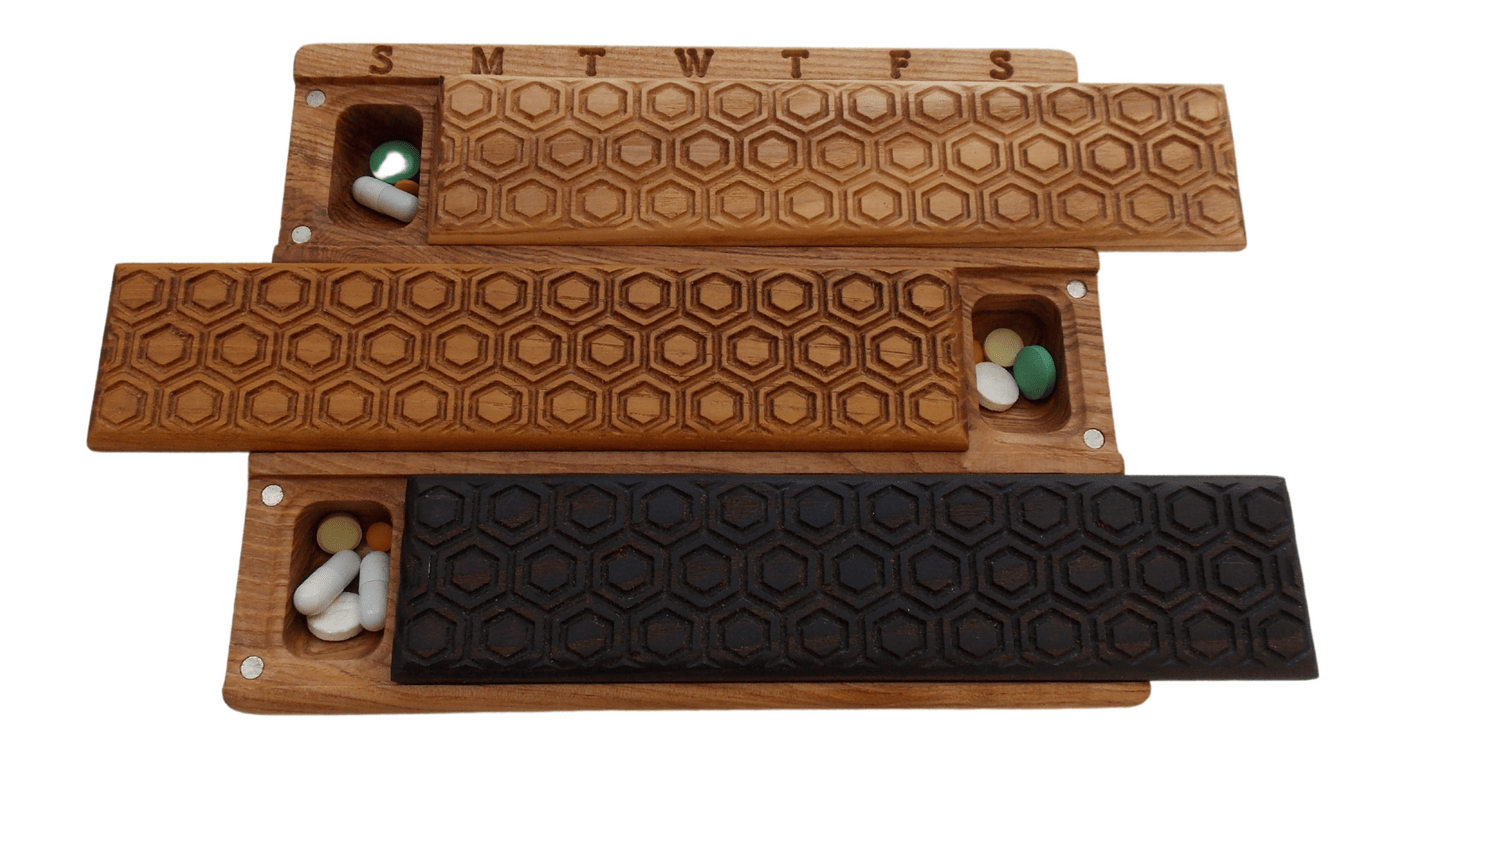 3 TIMES A DAY WEEKLY PILL ORGANIZER - HONEYCOMB | jtnlab